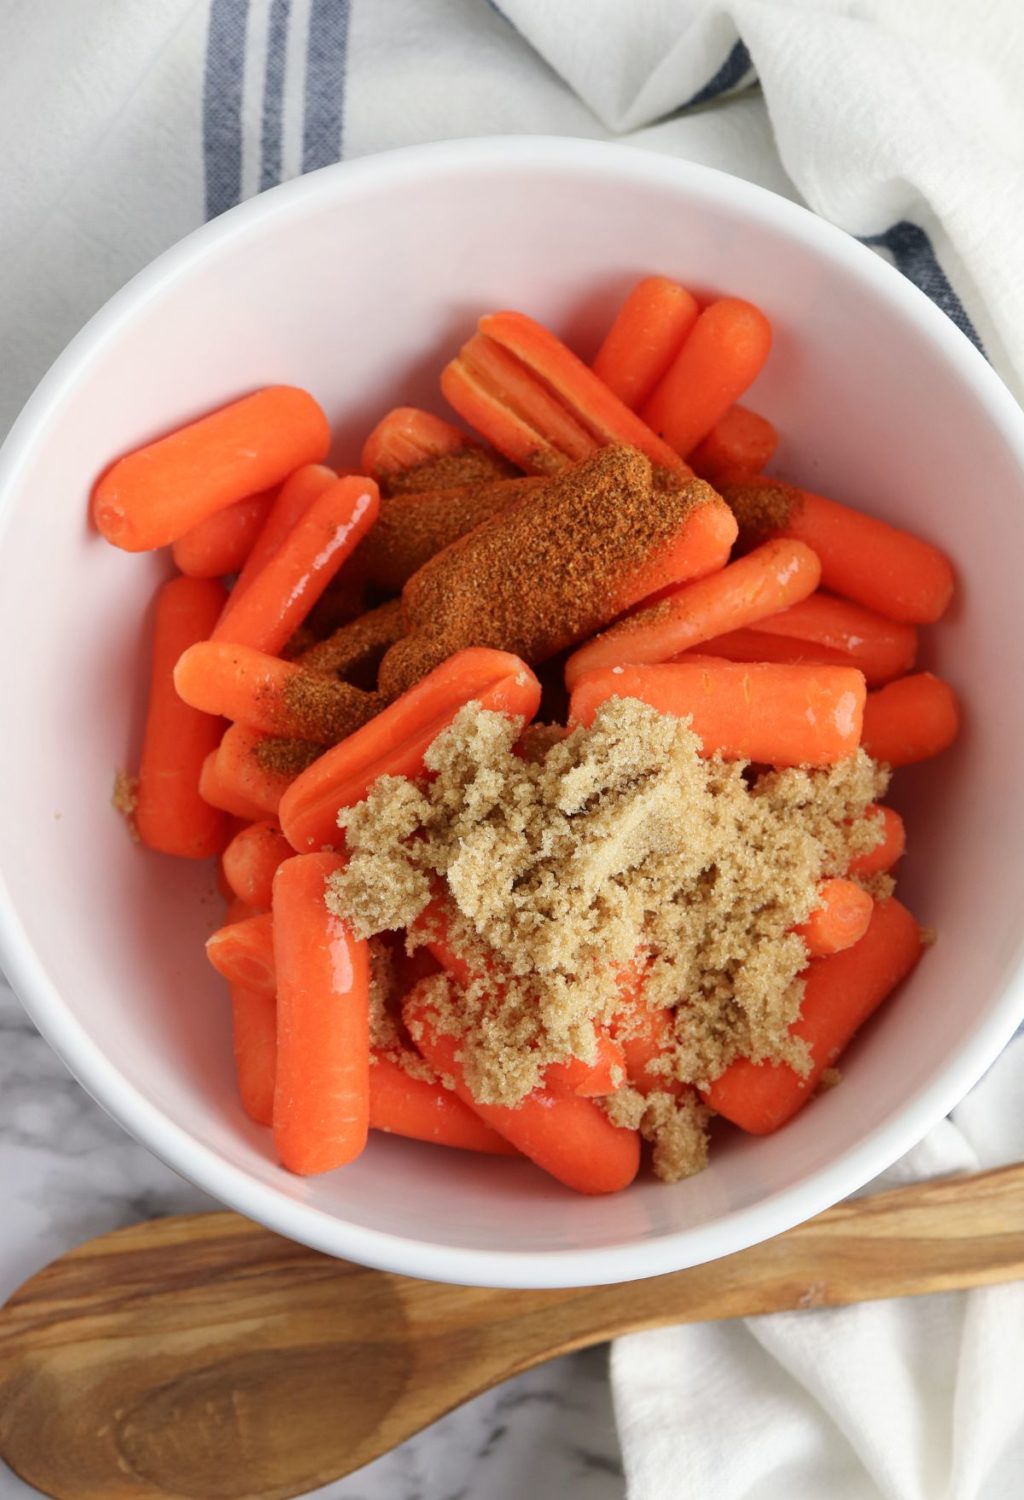 Carrots in a bowl with cinnamon and sugar.